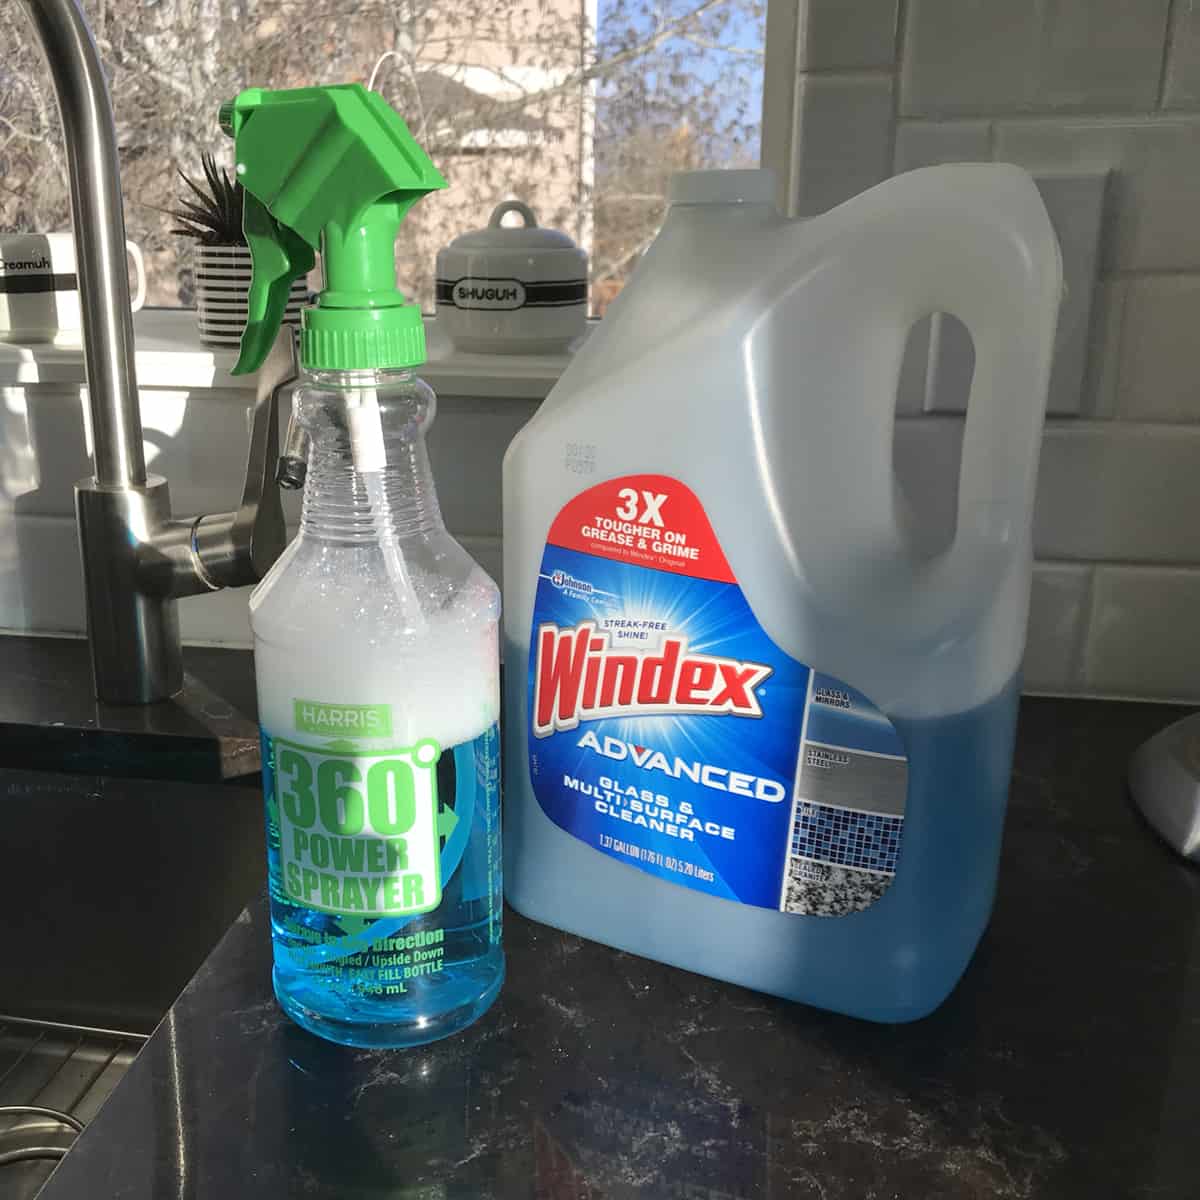 Ways To Use Windex That Will Make You, Cleaning Hardwood Floors With Windex